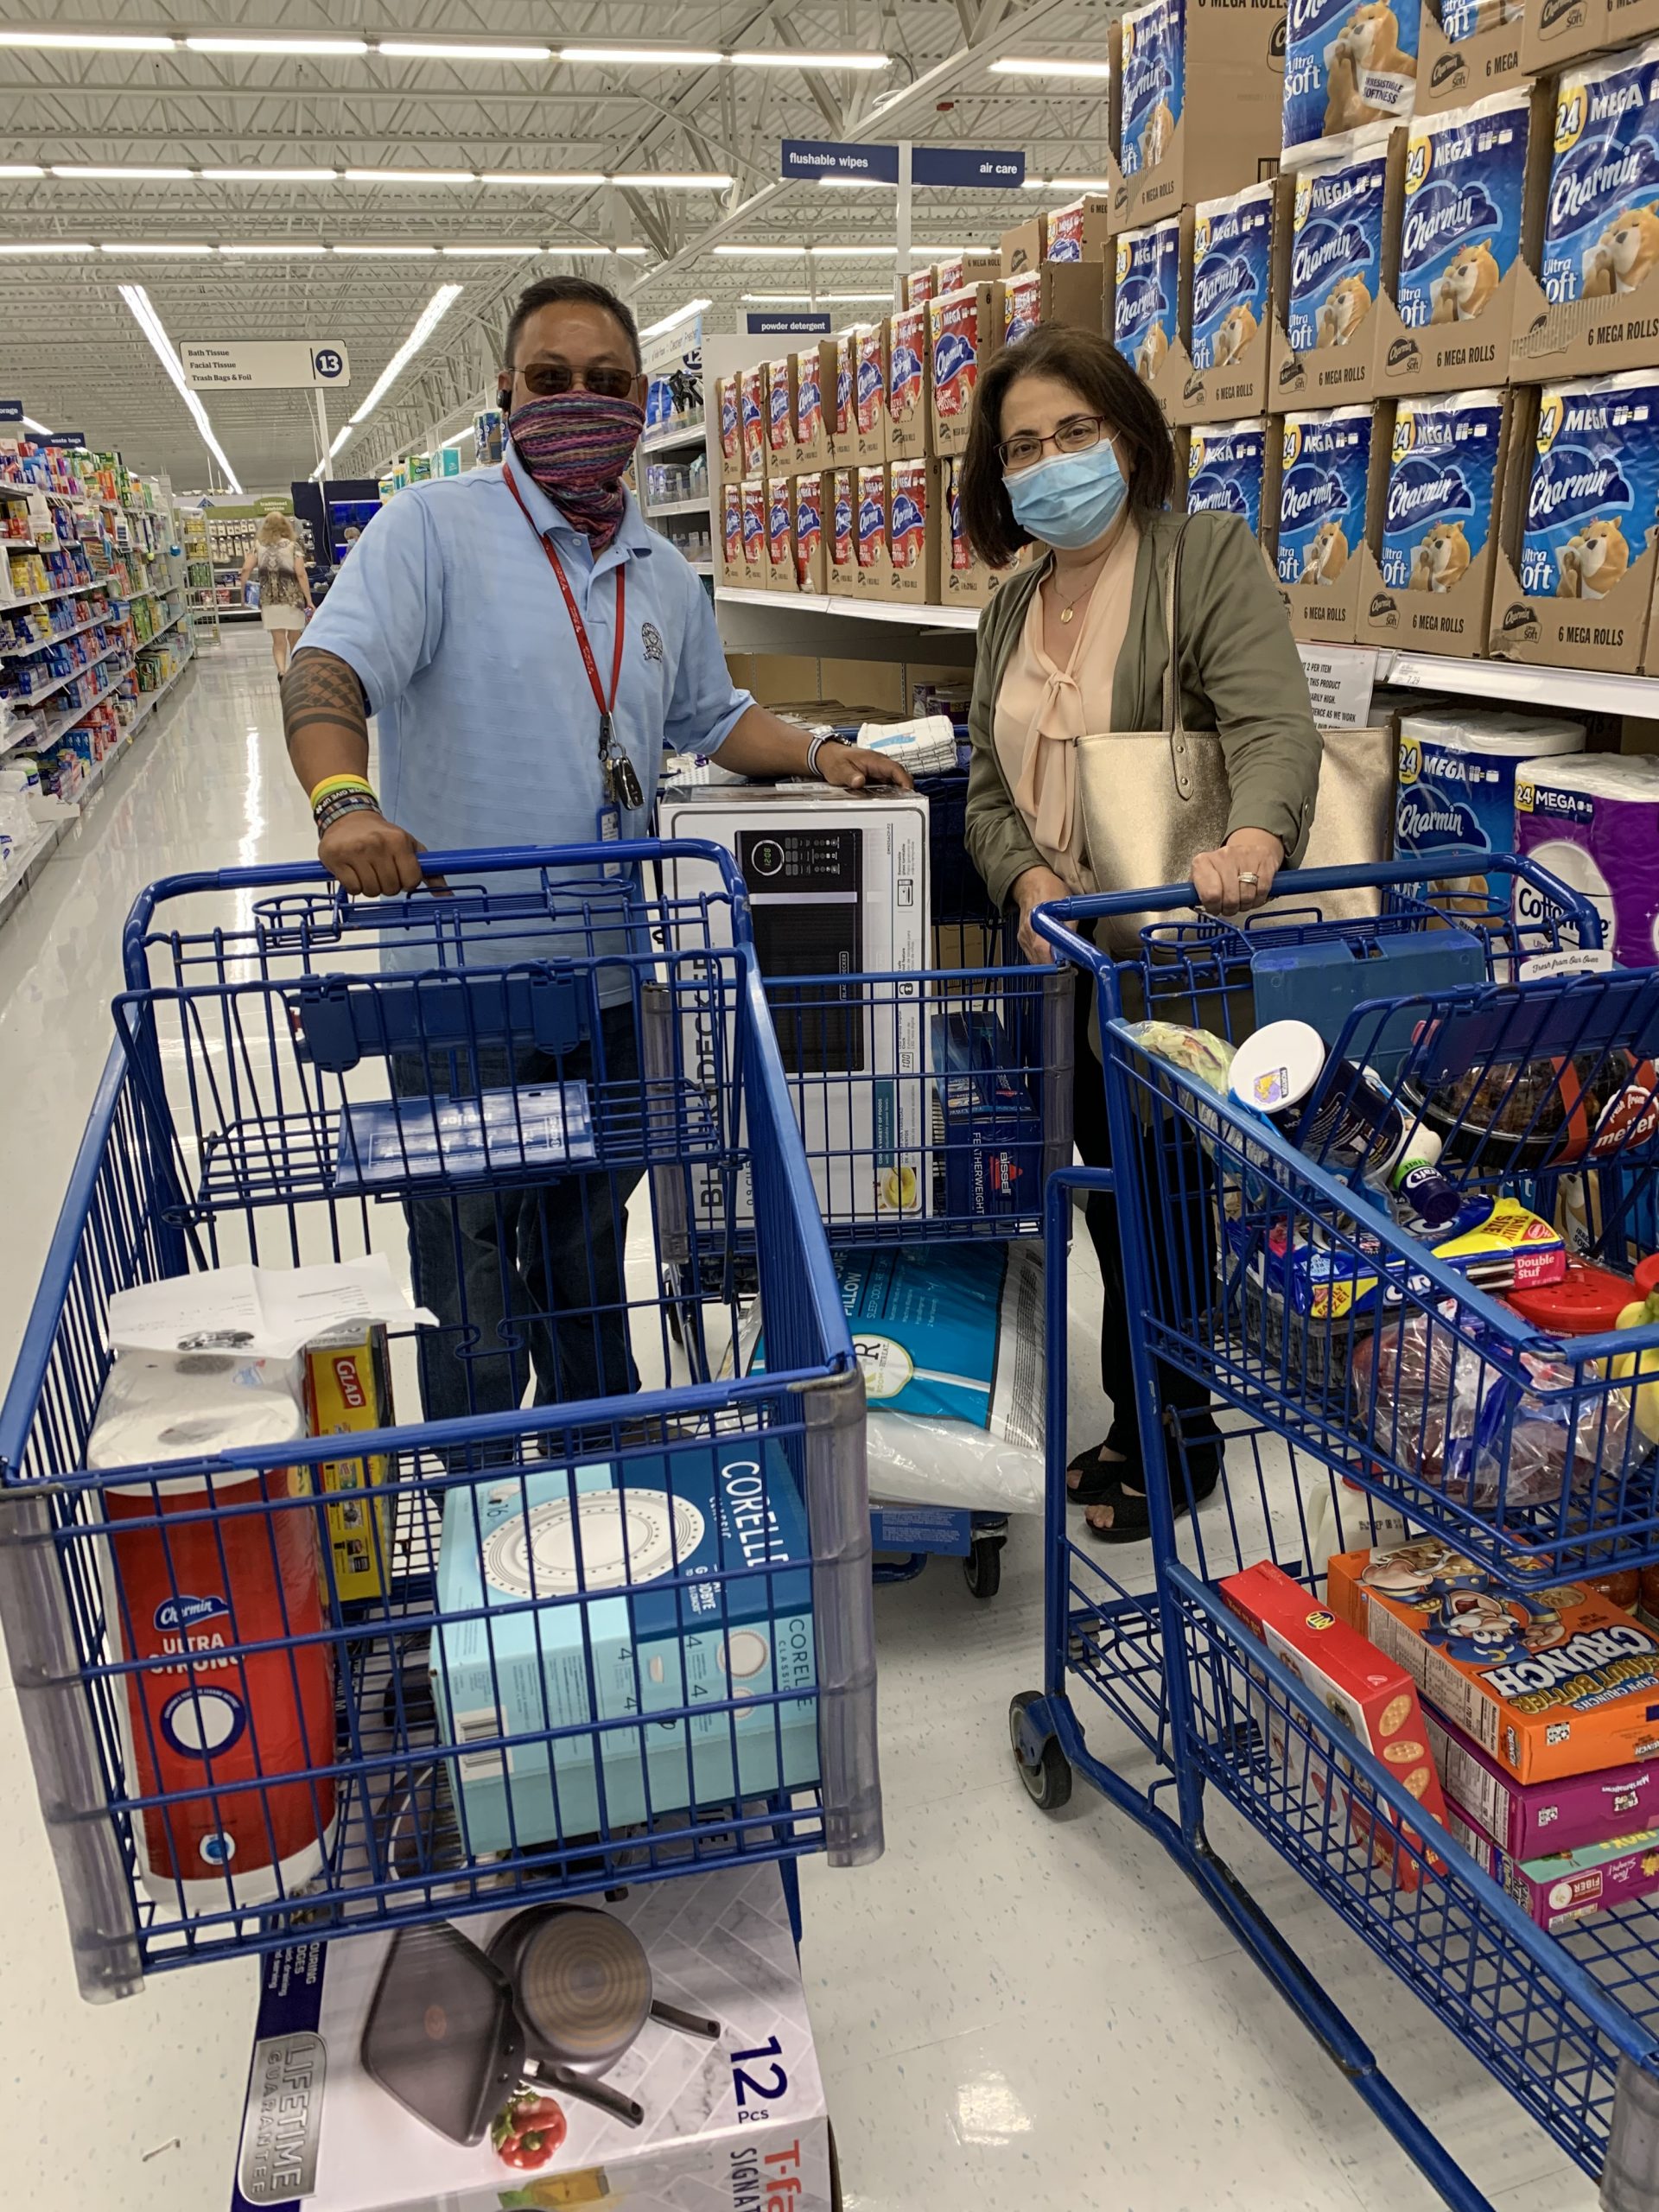 Two people with masks on and shopping carts full of supplies in a supermarket.